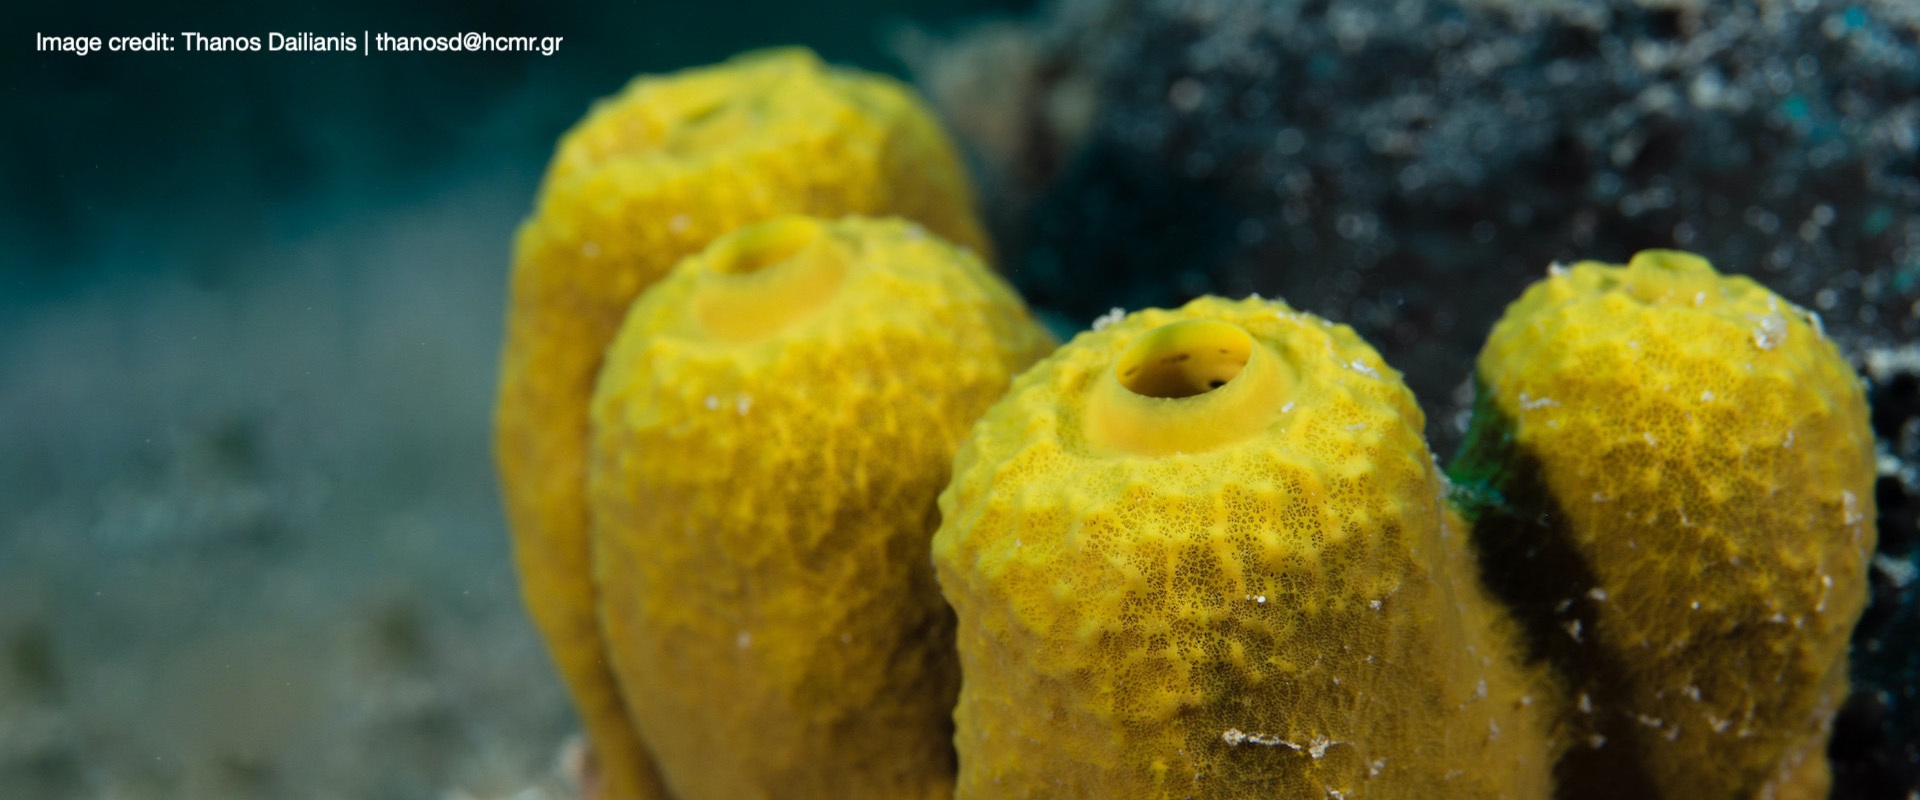 Active pumping enables sponges to filter seawater up to 15 times their body volume per hour, recycling nutrients and accumulating pollutants.